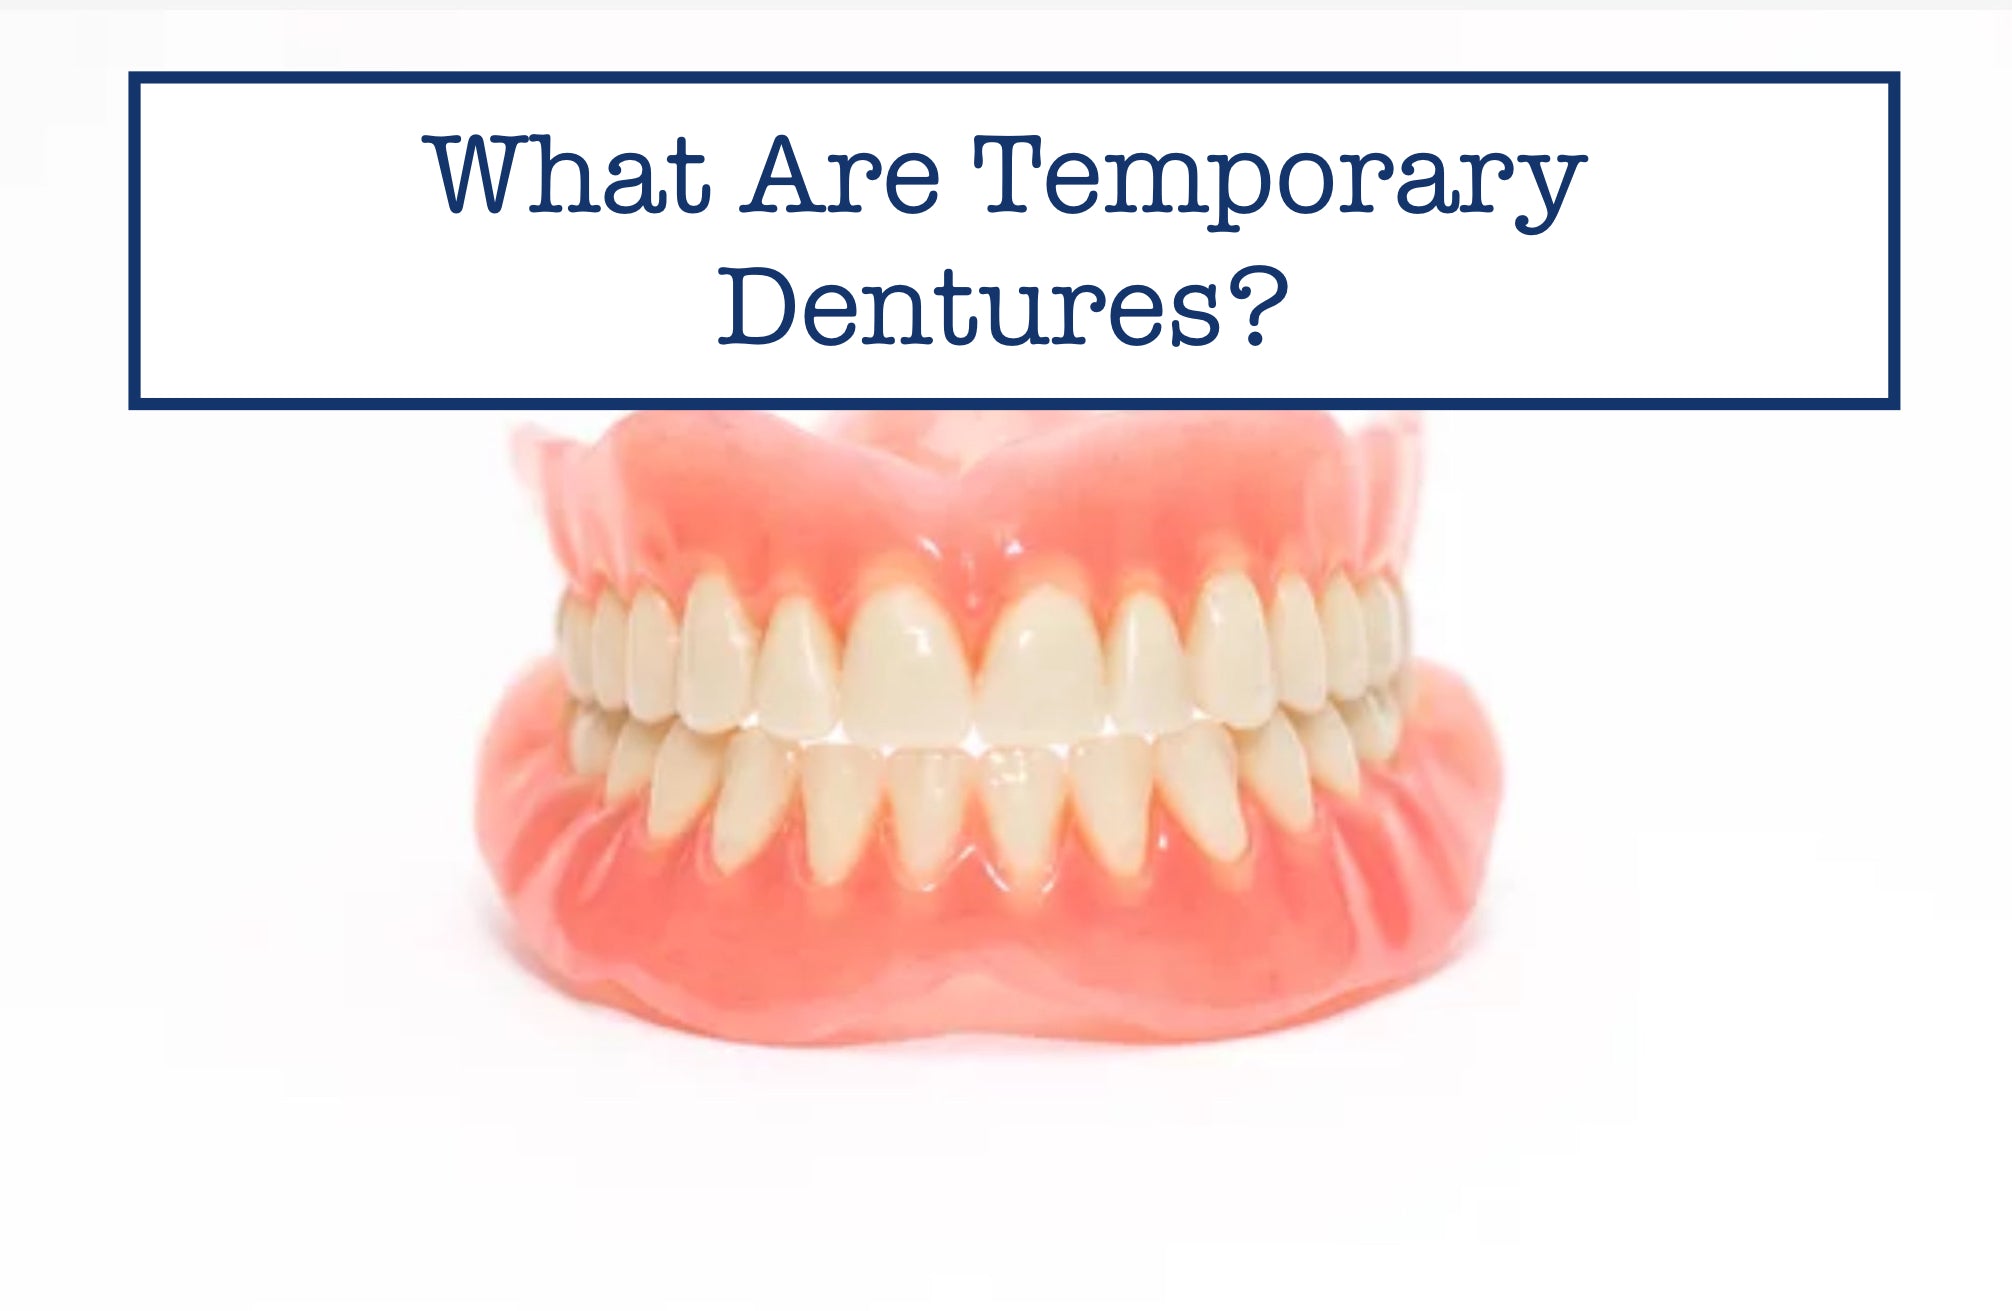 What Are Temporary Dentures?